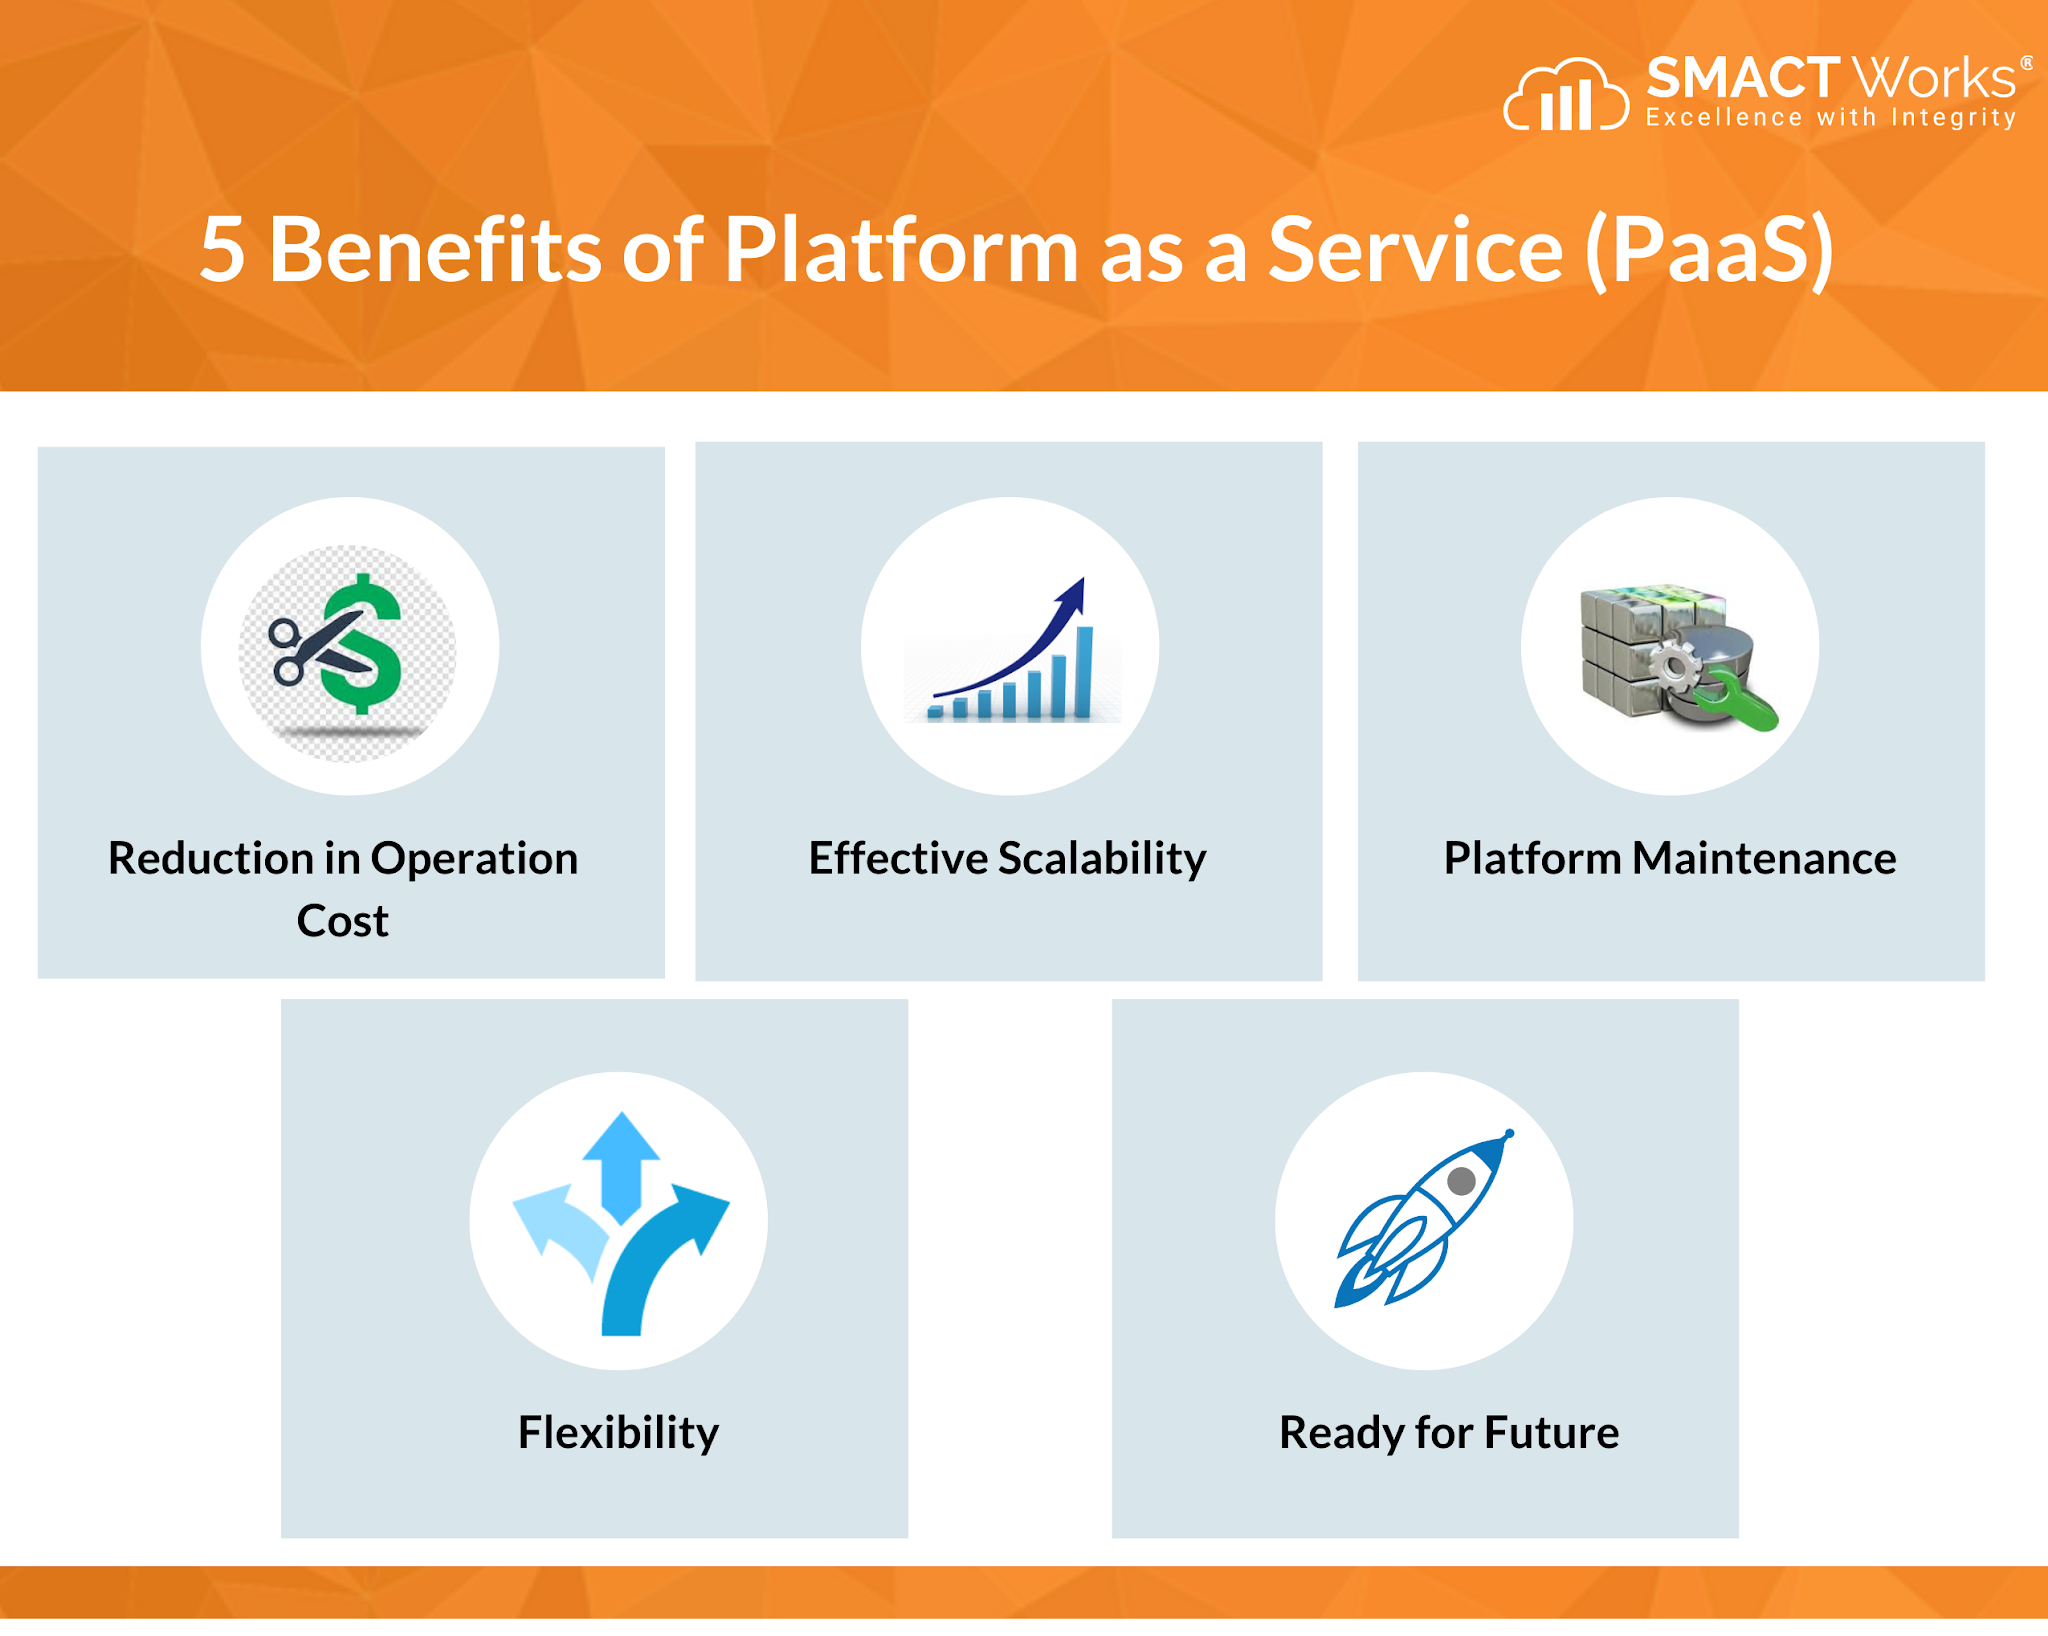 5 Benefits of PaaS: Reduction in Operation Cost, Effective Stability, Platform Maintenance, Flexibility, Future Readiness